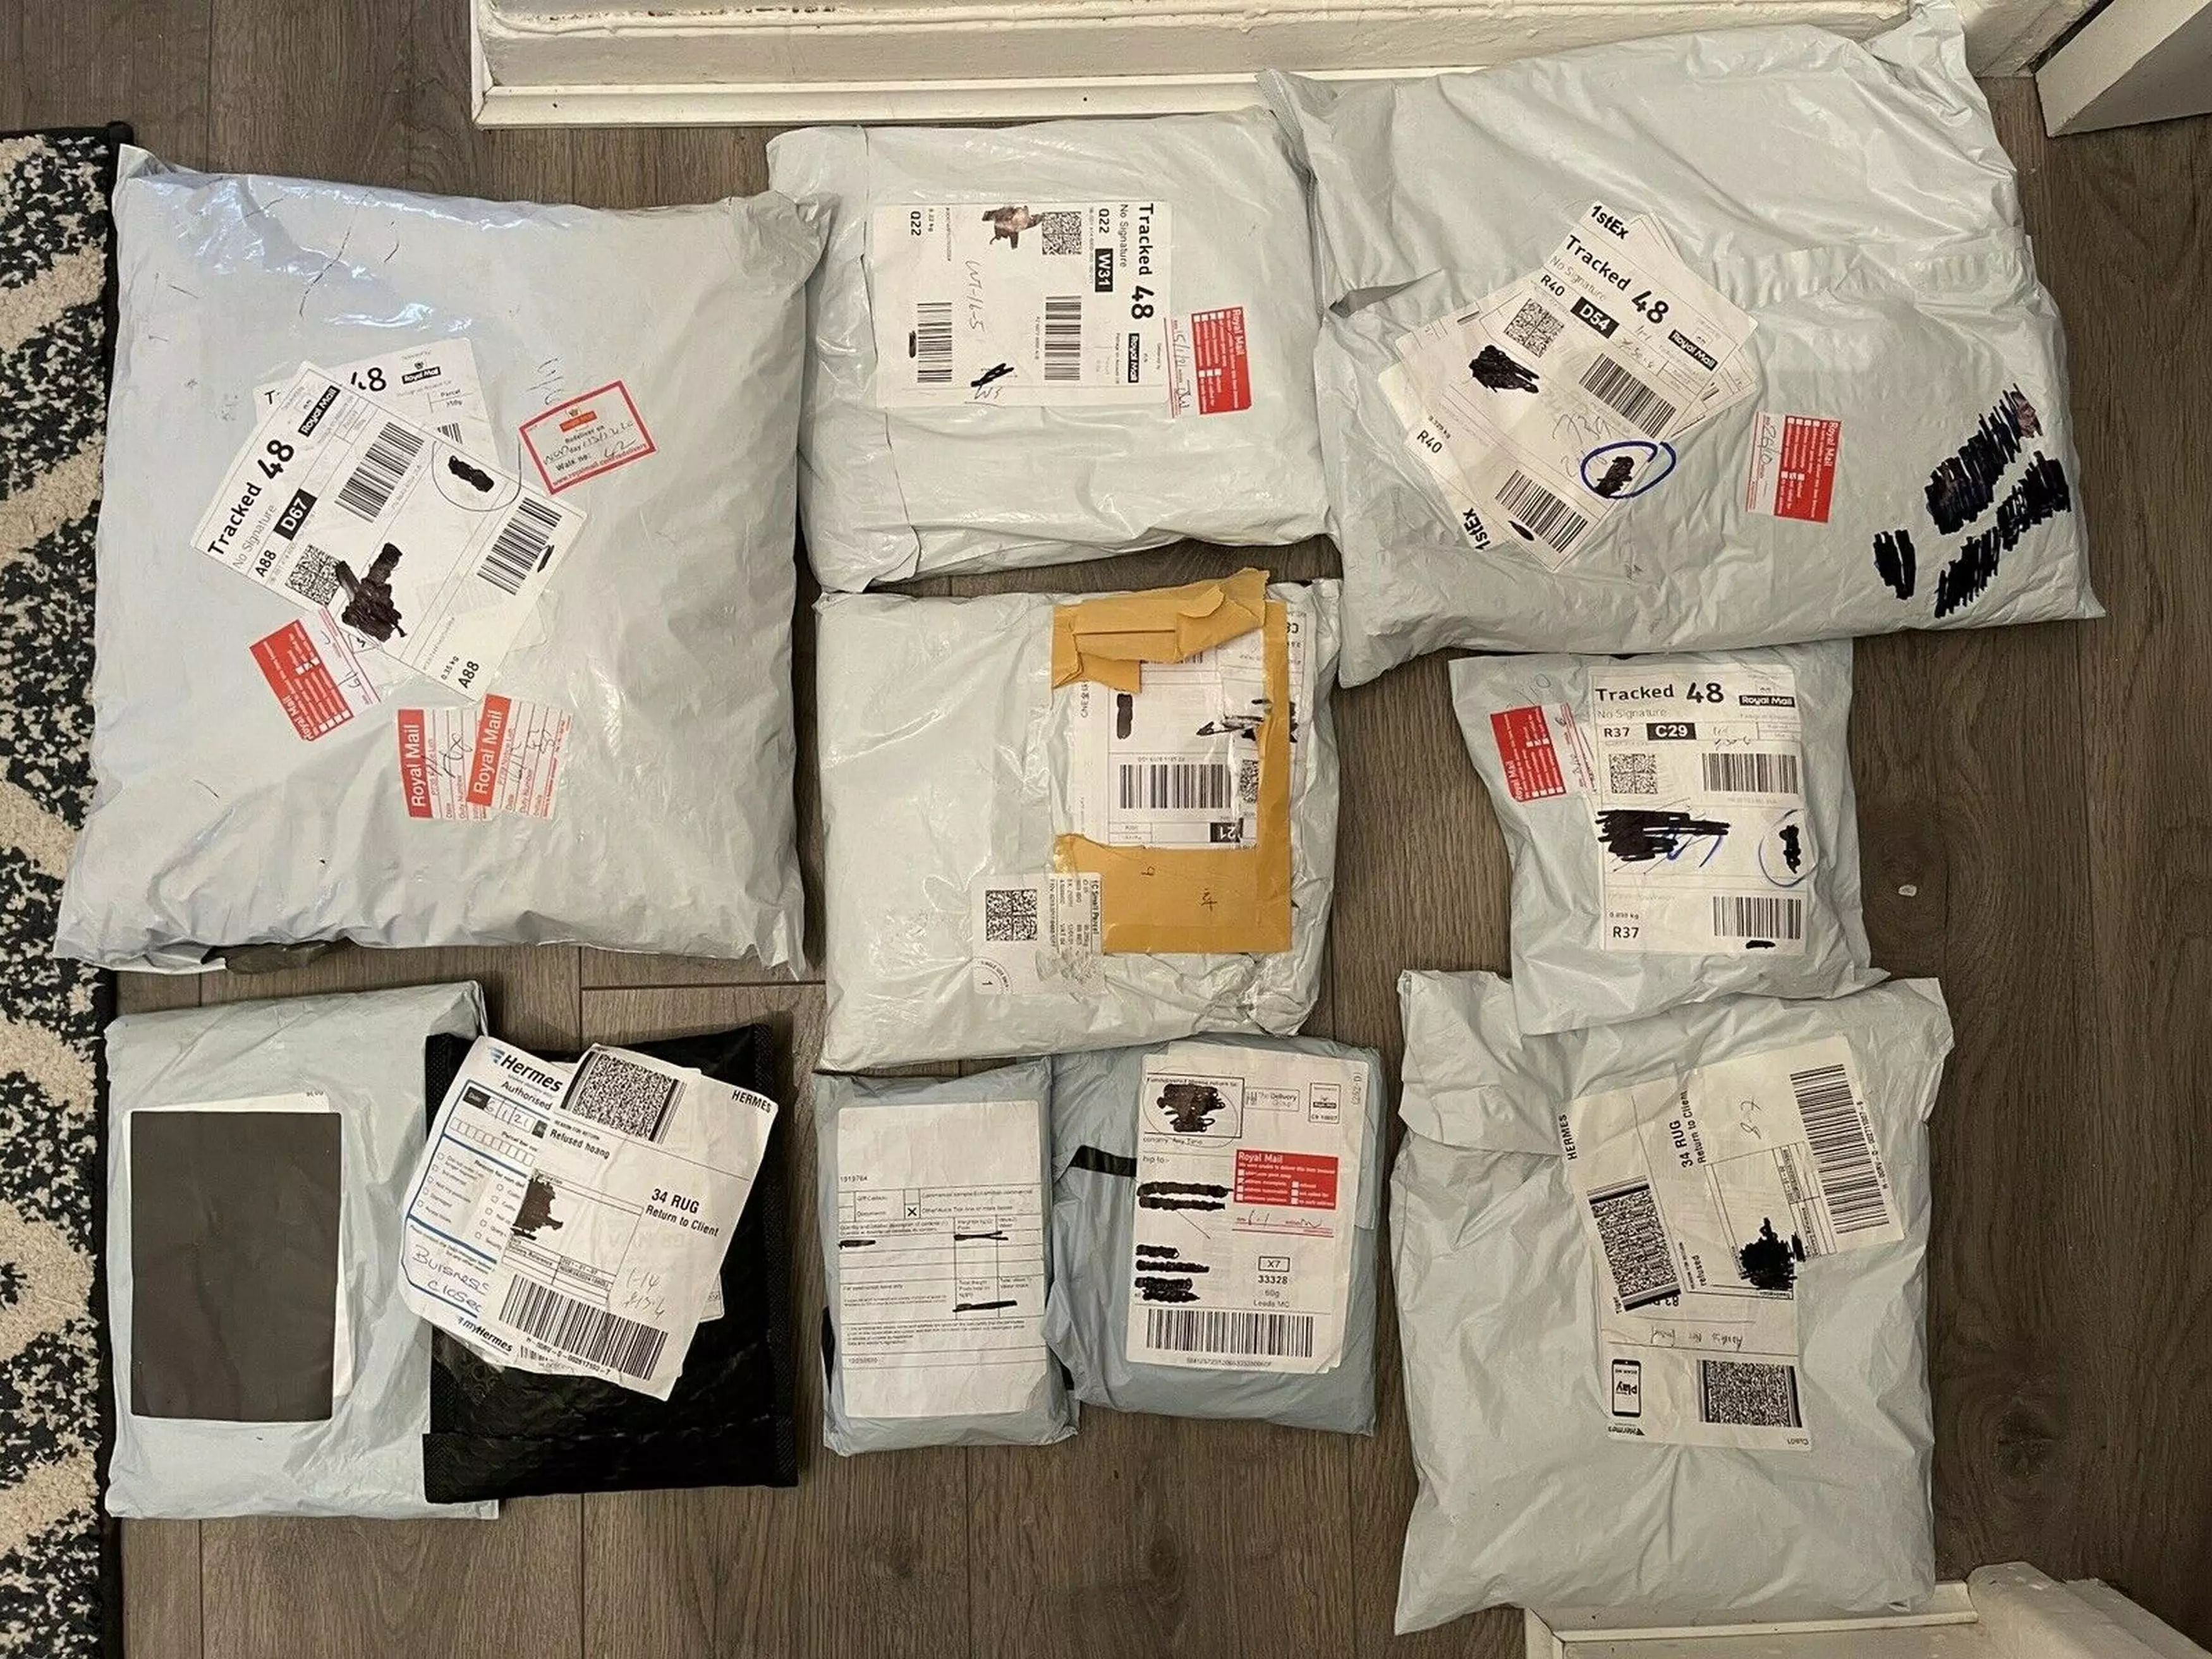 Hundreds of 'lost' Royal Mail and Hermes parcels are being flogged on eBay, it has been reported (